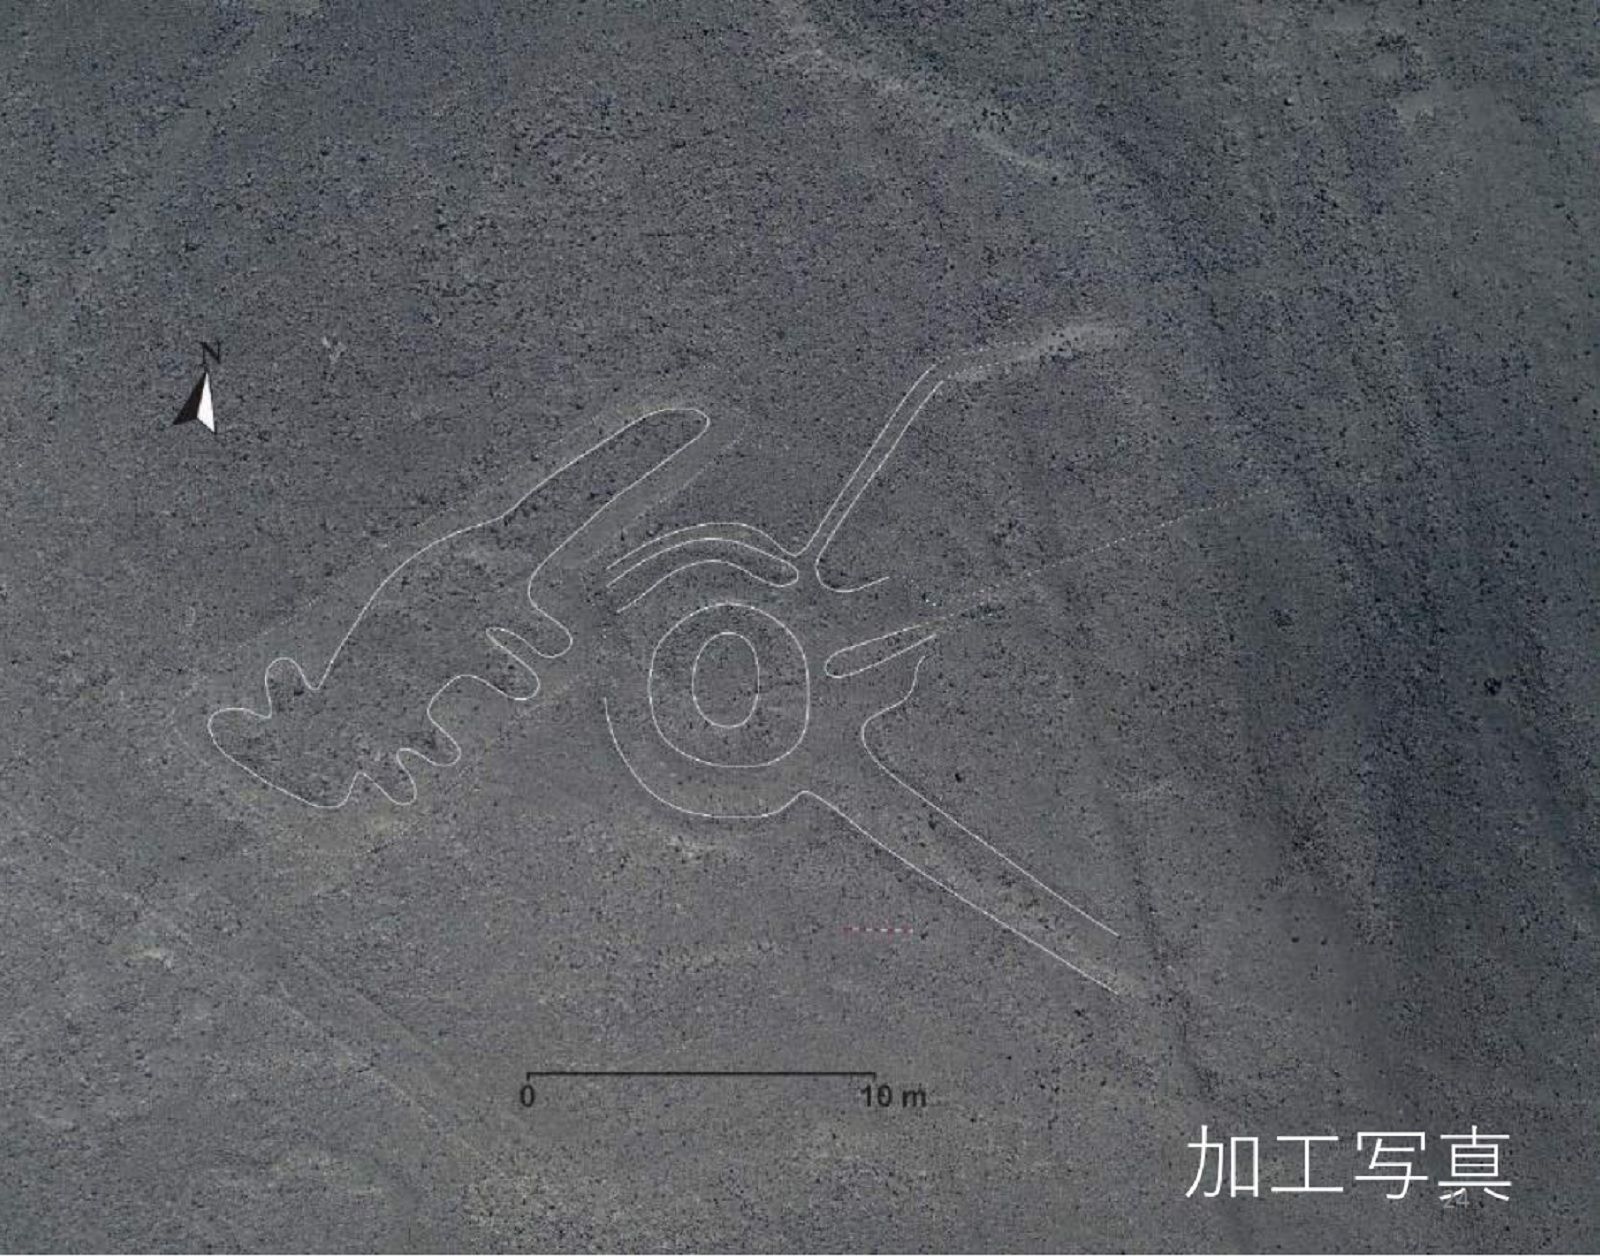 Scientists use IBM AI to discover mysterious drawings in Peru image 7